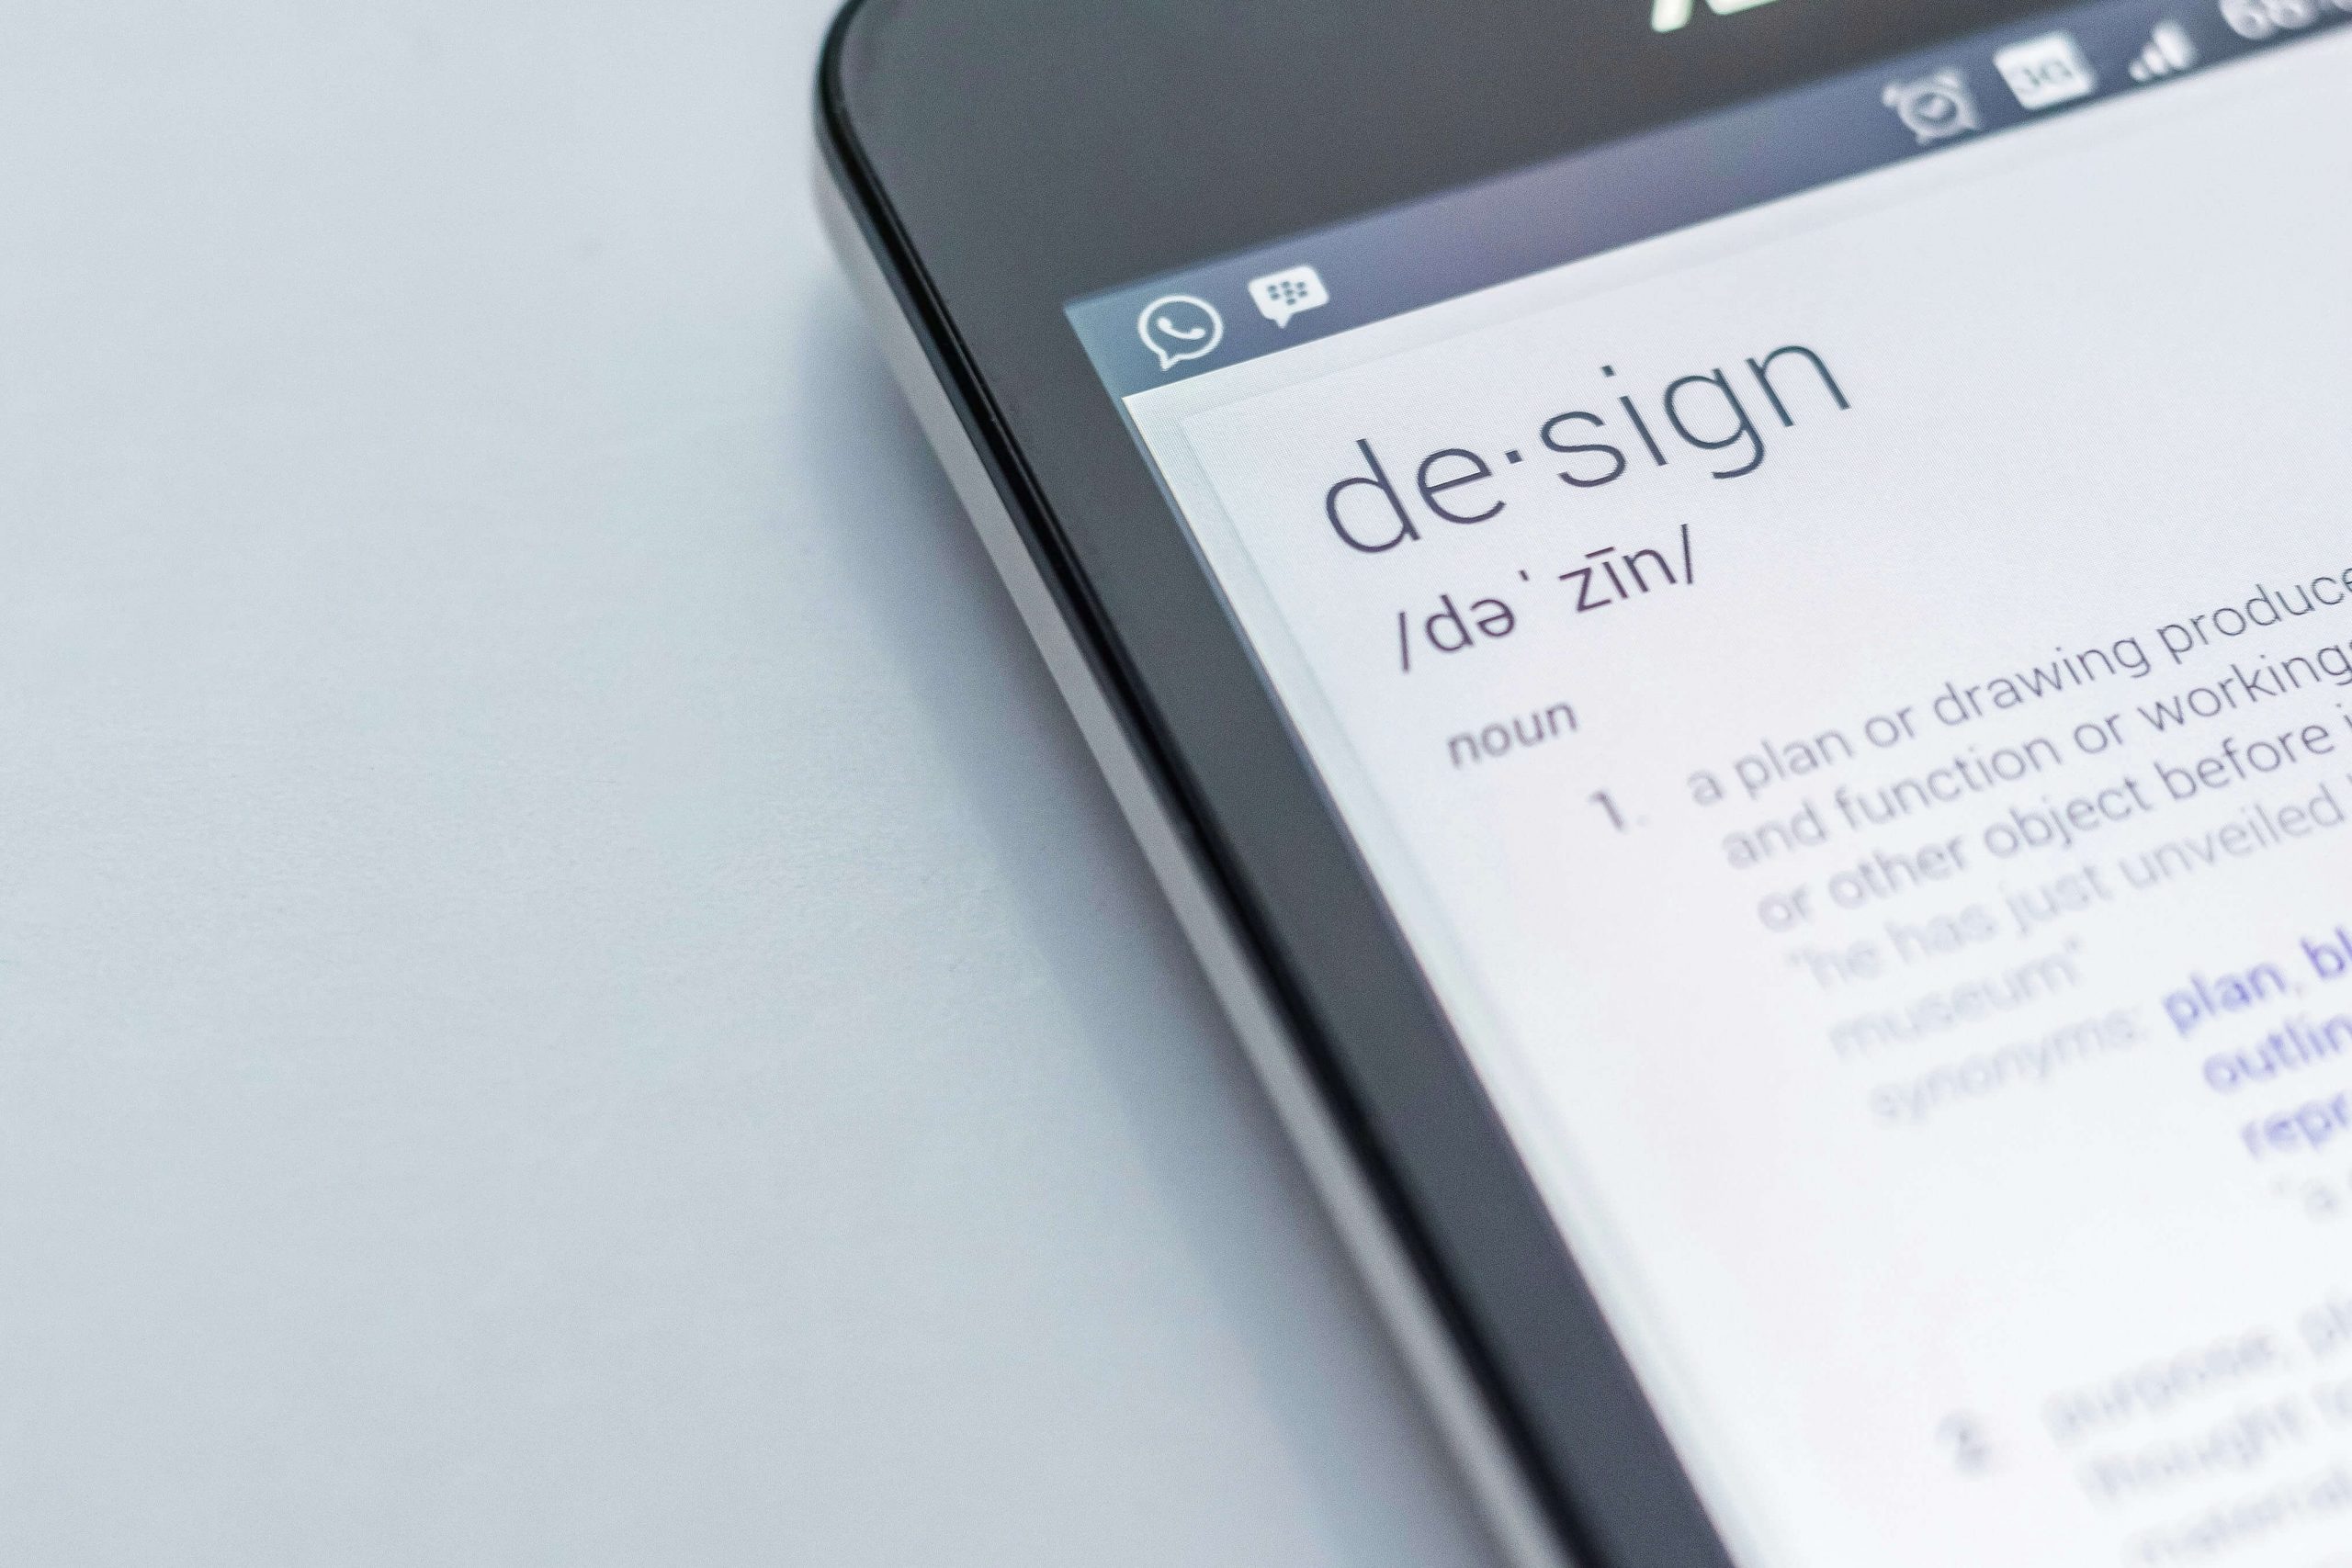 A guide to creating accessible designs